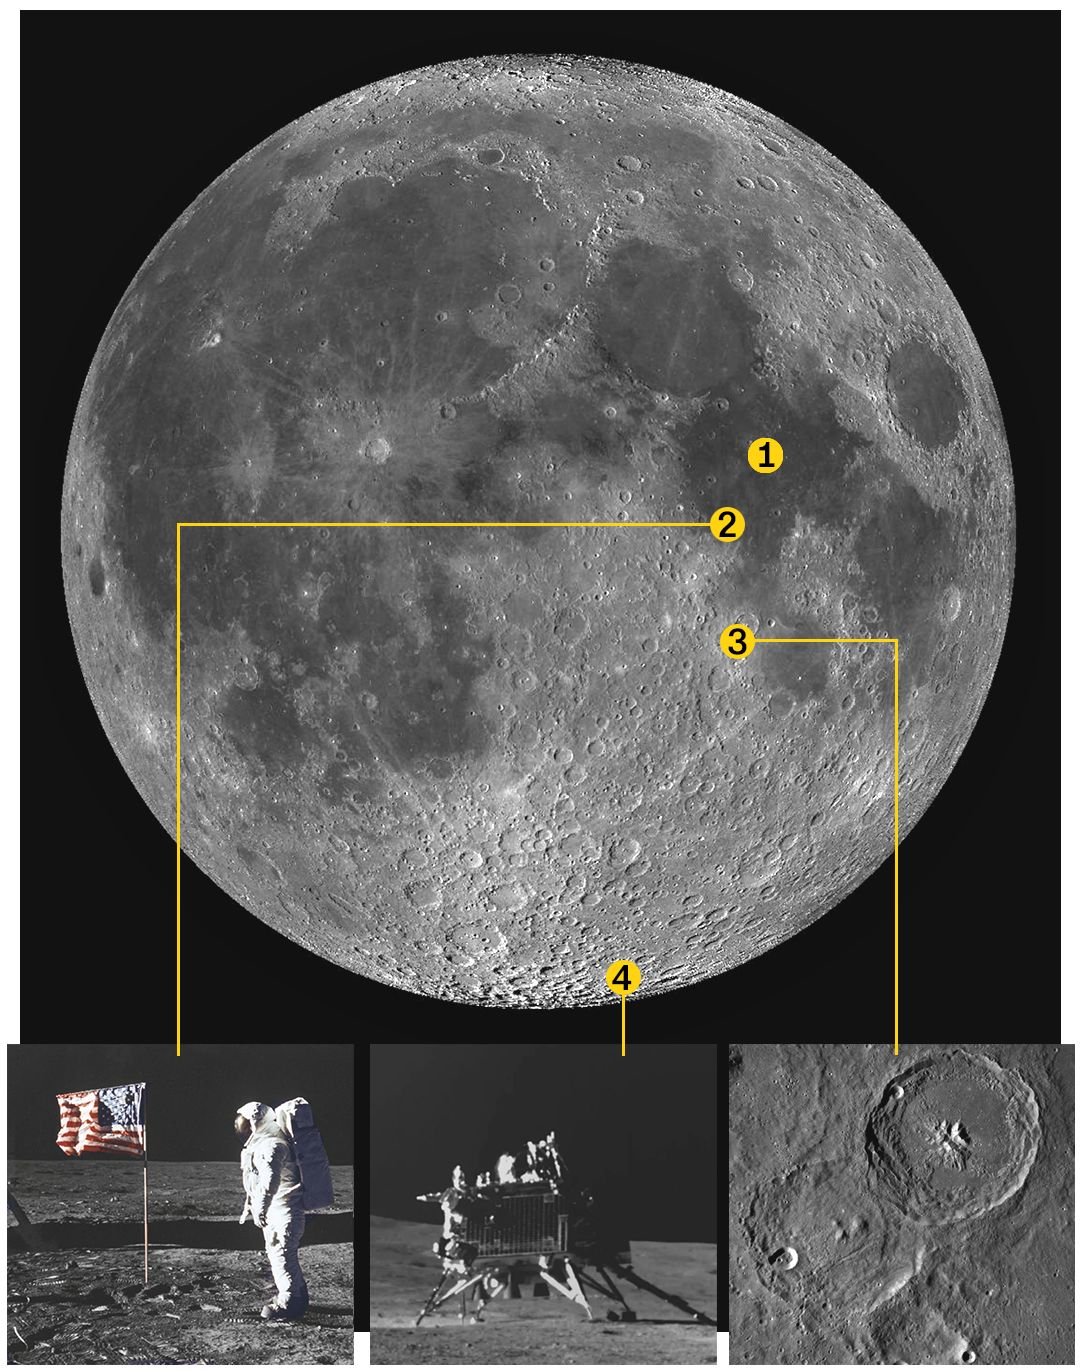 <i>CNN/Getty Images/ISRO/lROC</i><br/>1) Sea of Tranquility 2) Apollo 11 landing site 3) the Shioli crater that the SLIM moon sniper is targeting and 4) the Chandrayaan-3 lunar landing site